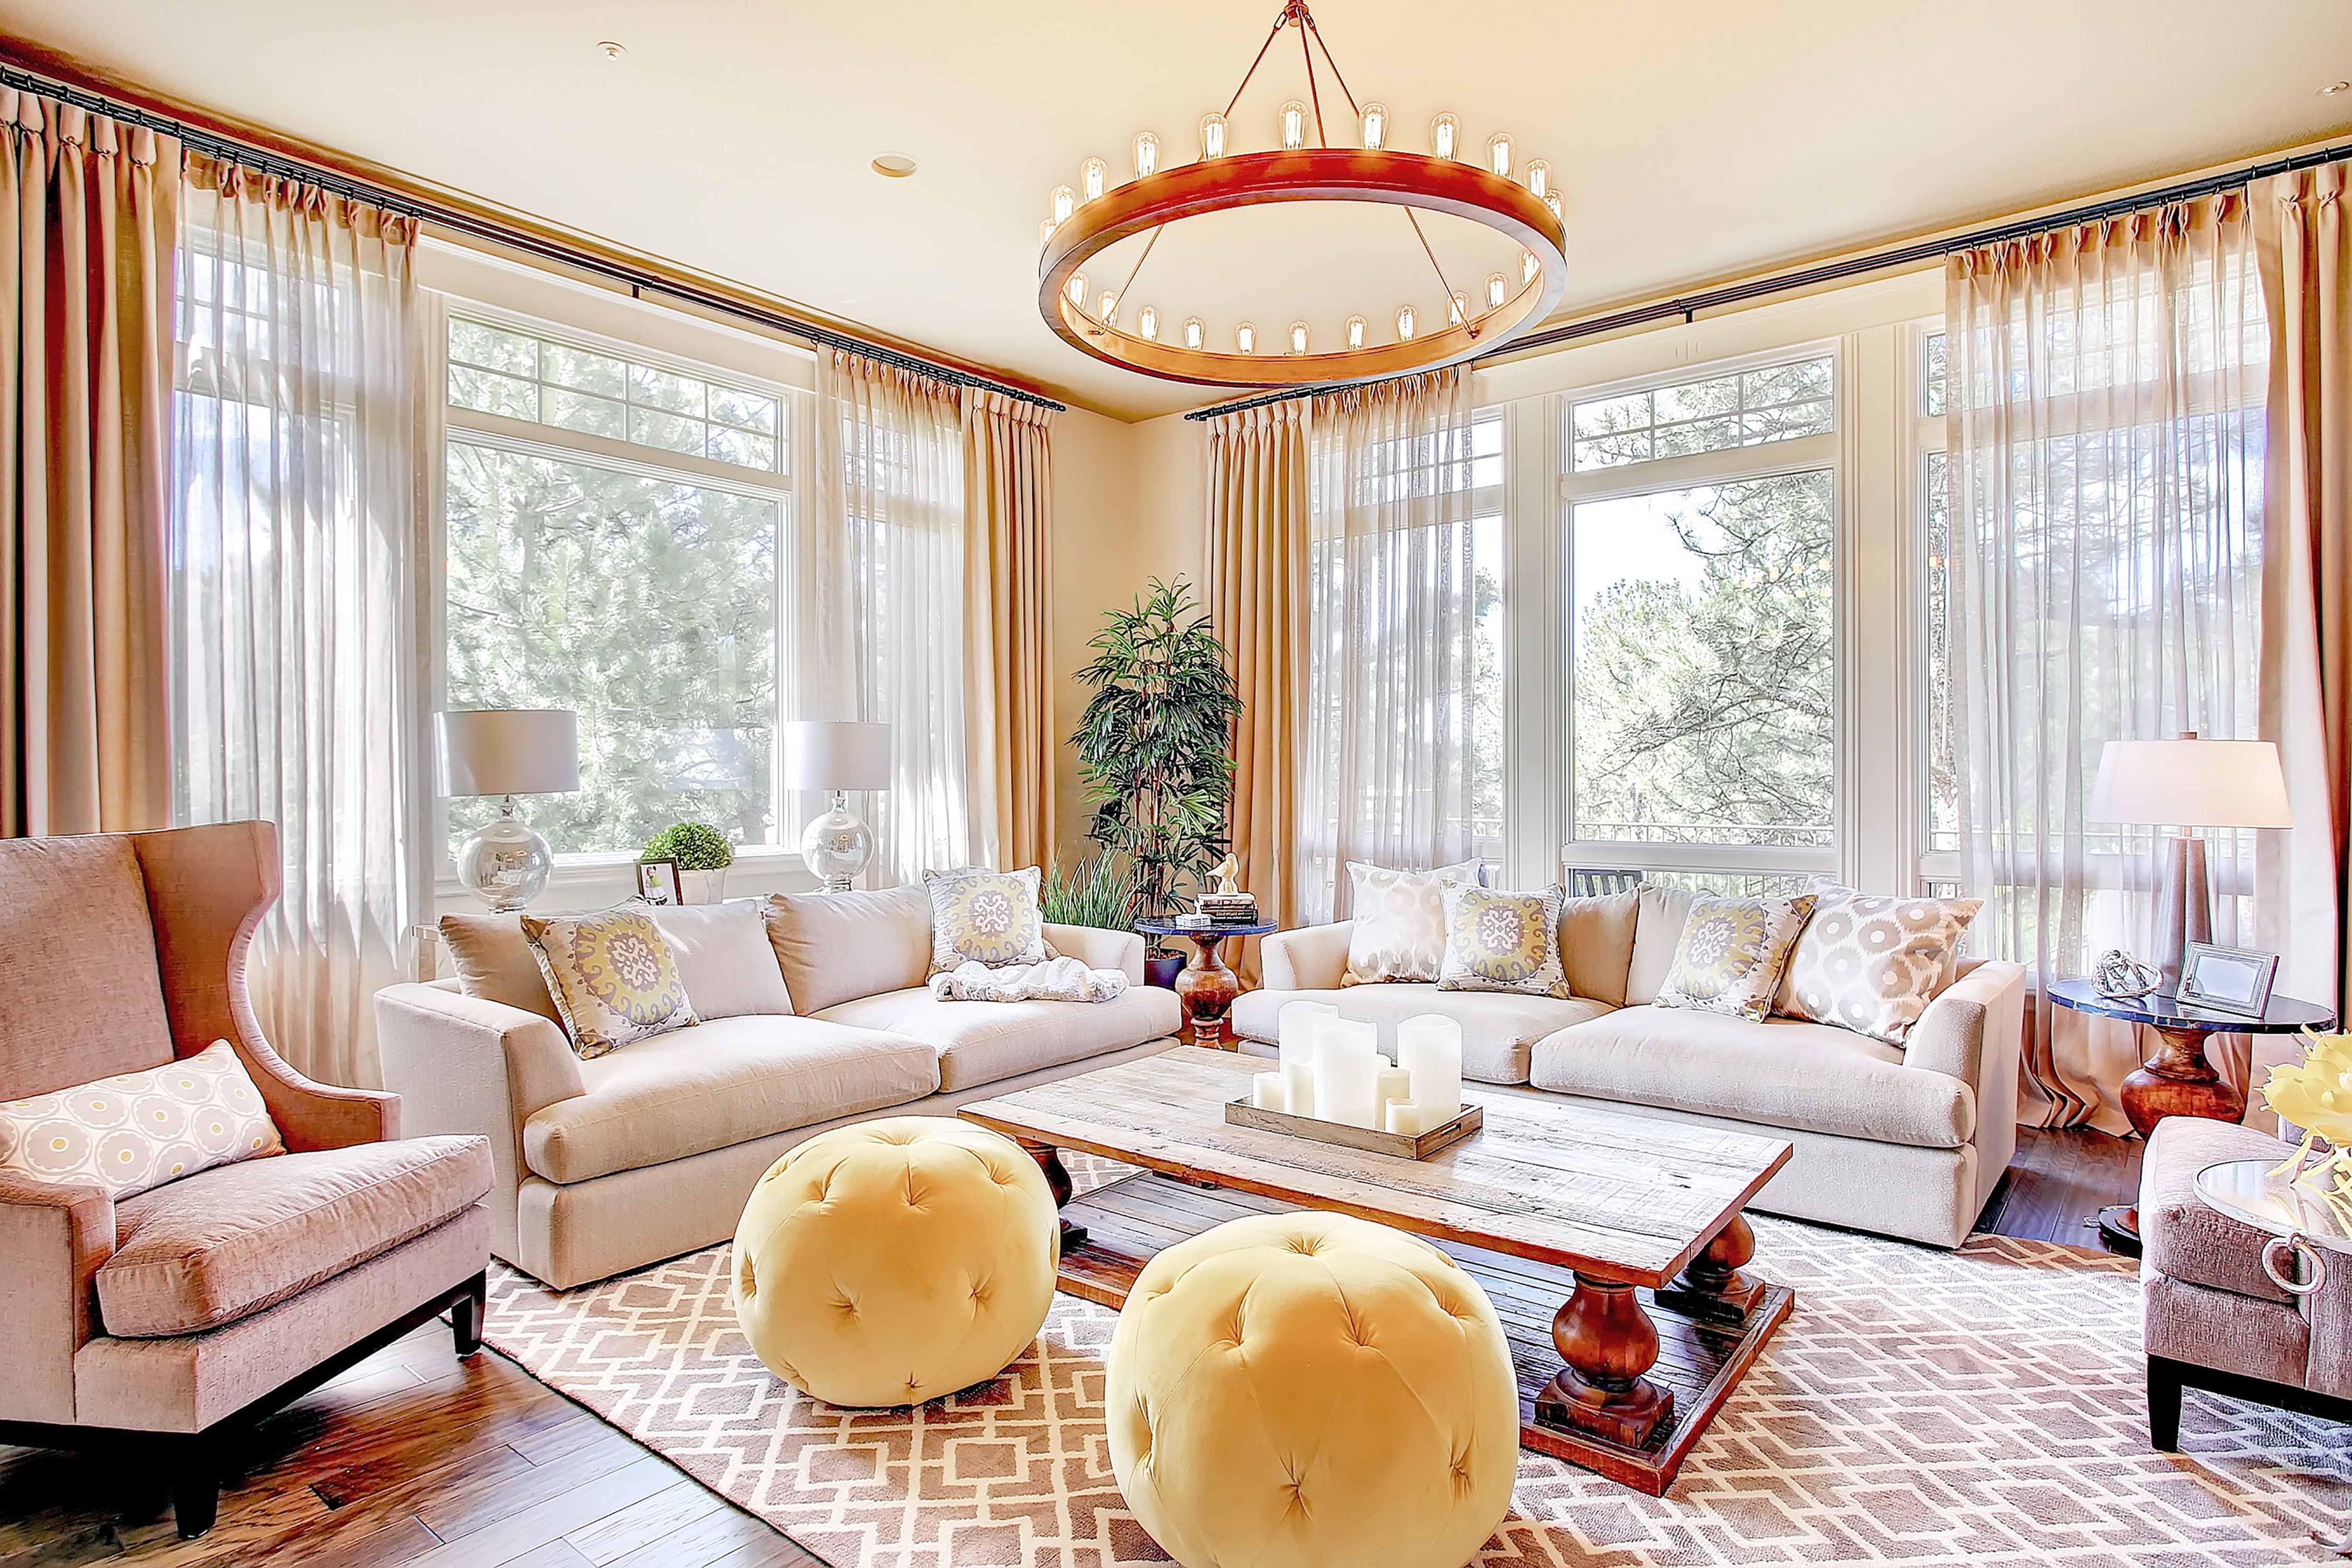 Modern Luxury Living Room With Round Chandelier Lighting (View 31 of 32)